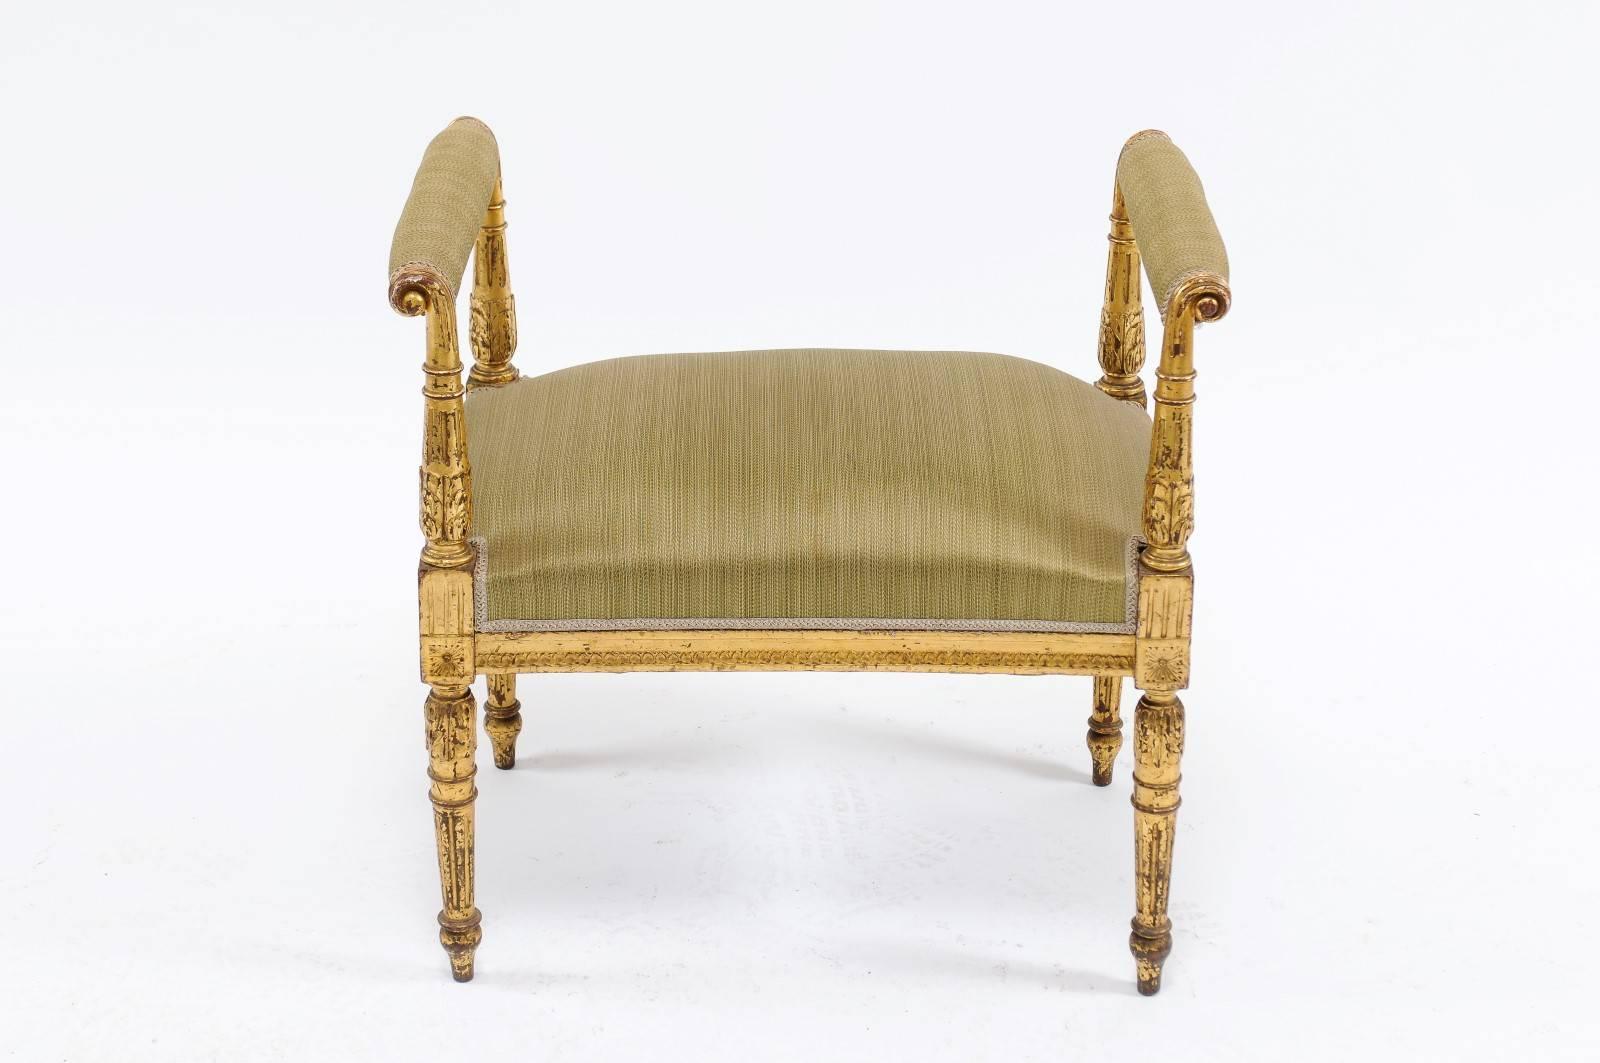 A French 19th century giltwood upholstered bench with out-scrolled arms, acanthus leaves and fluted legs. We found this darling little 19th century banquette at the Paris flea market and immediately fell in love. The delicate lines, intricate